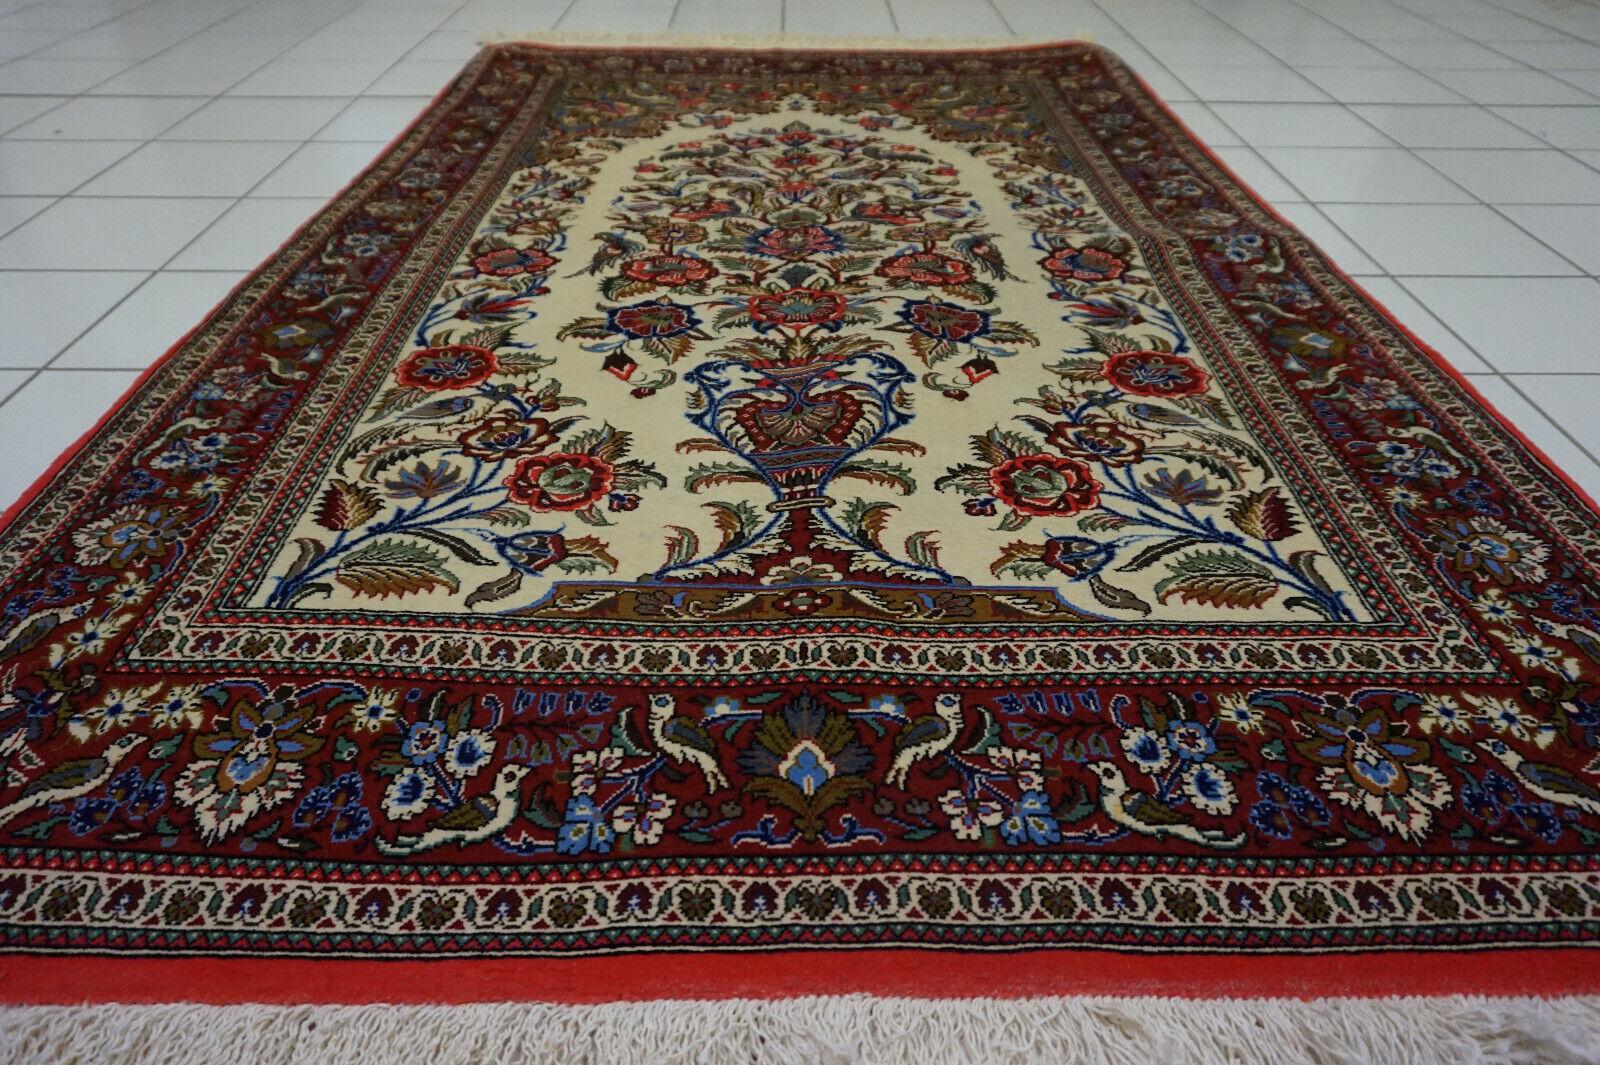 Handmade Vintage Persian Style Qum Prayer Rug 3.4' x 5.4', 1970s - 1D49 In Good Condition For Sale In Bordeaux, FR